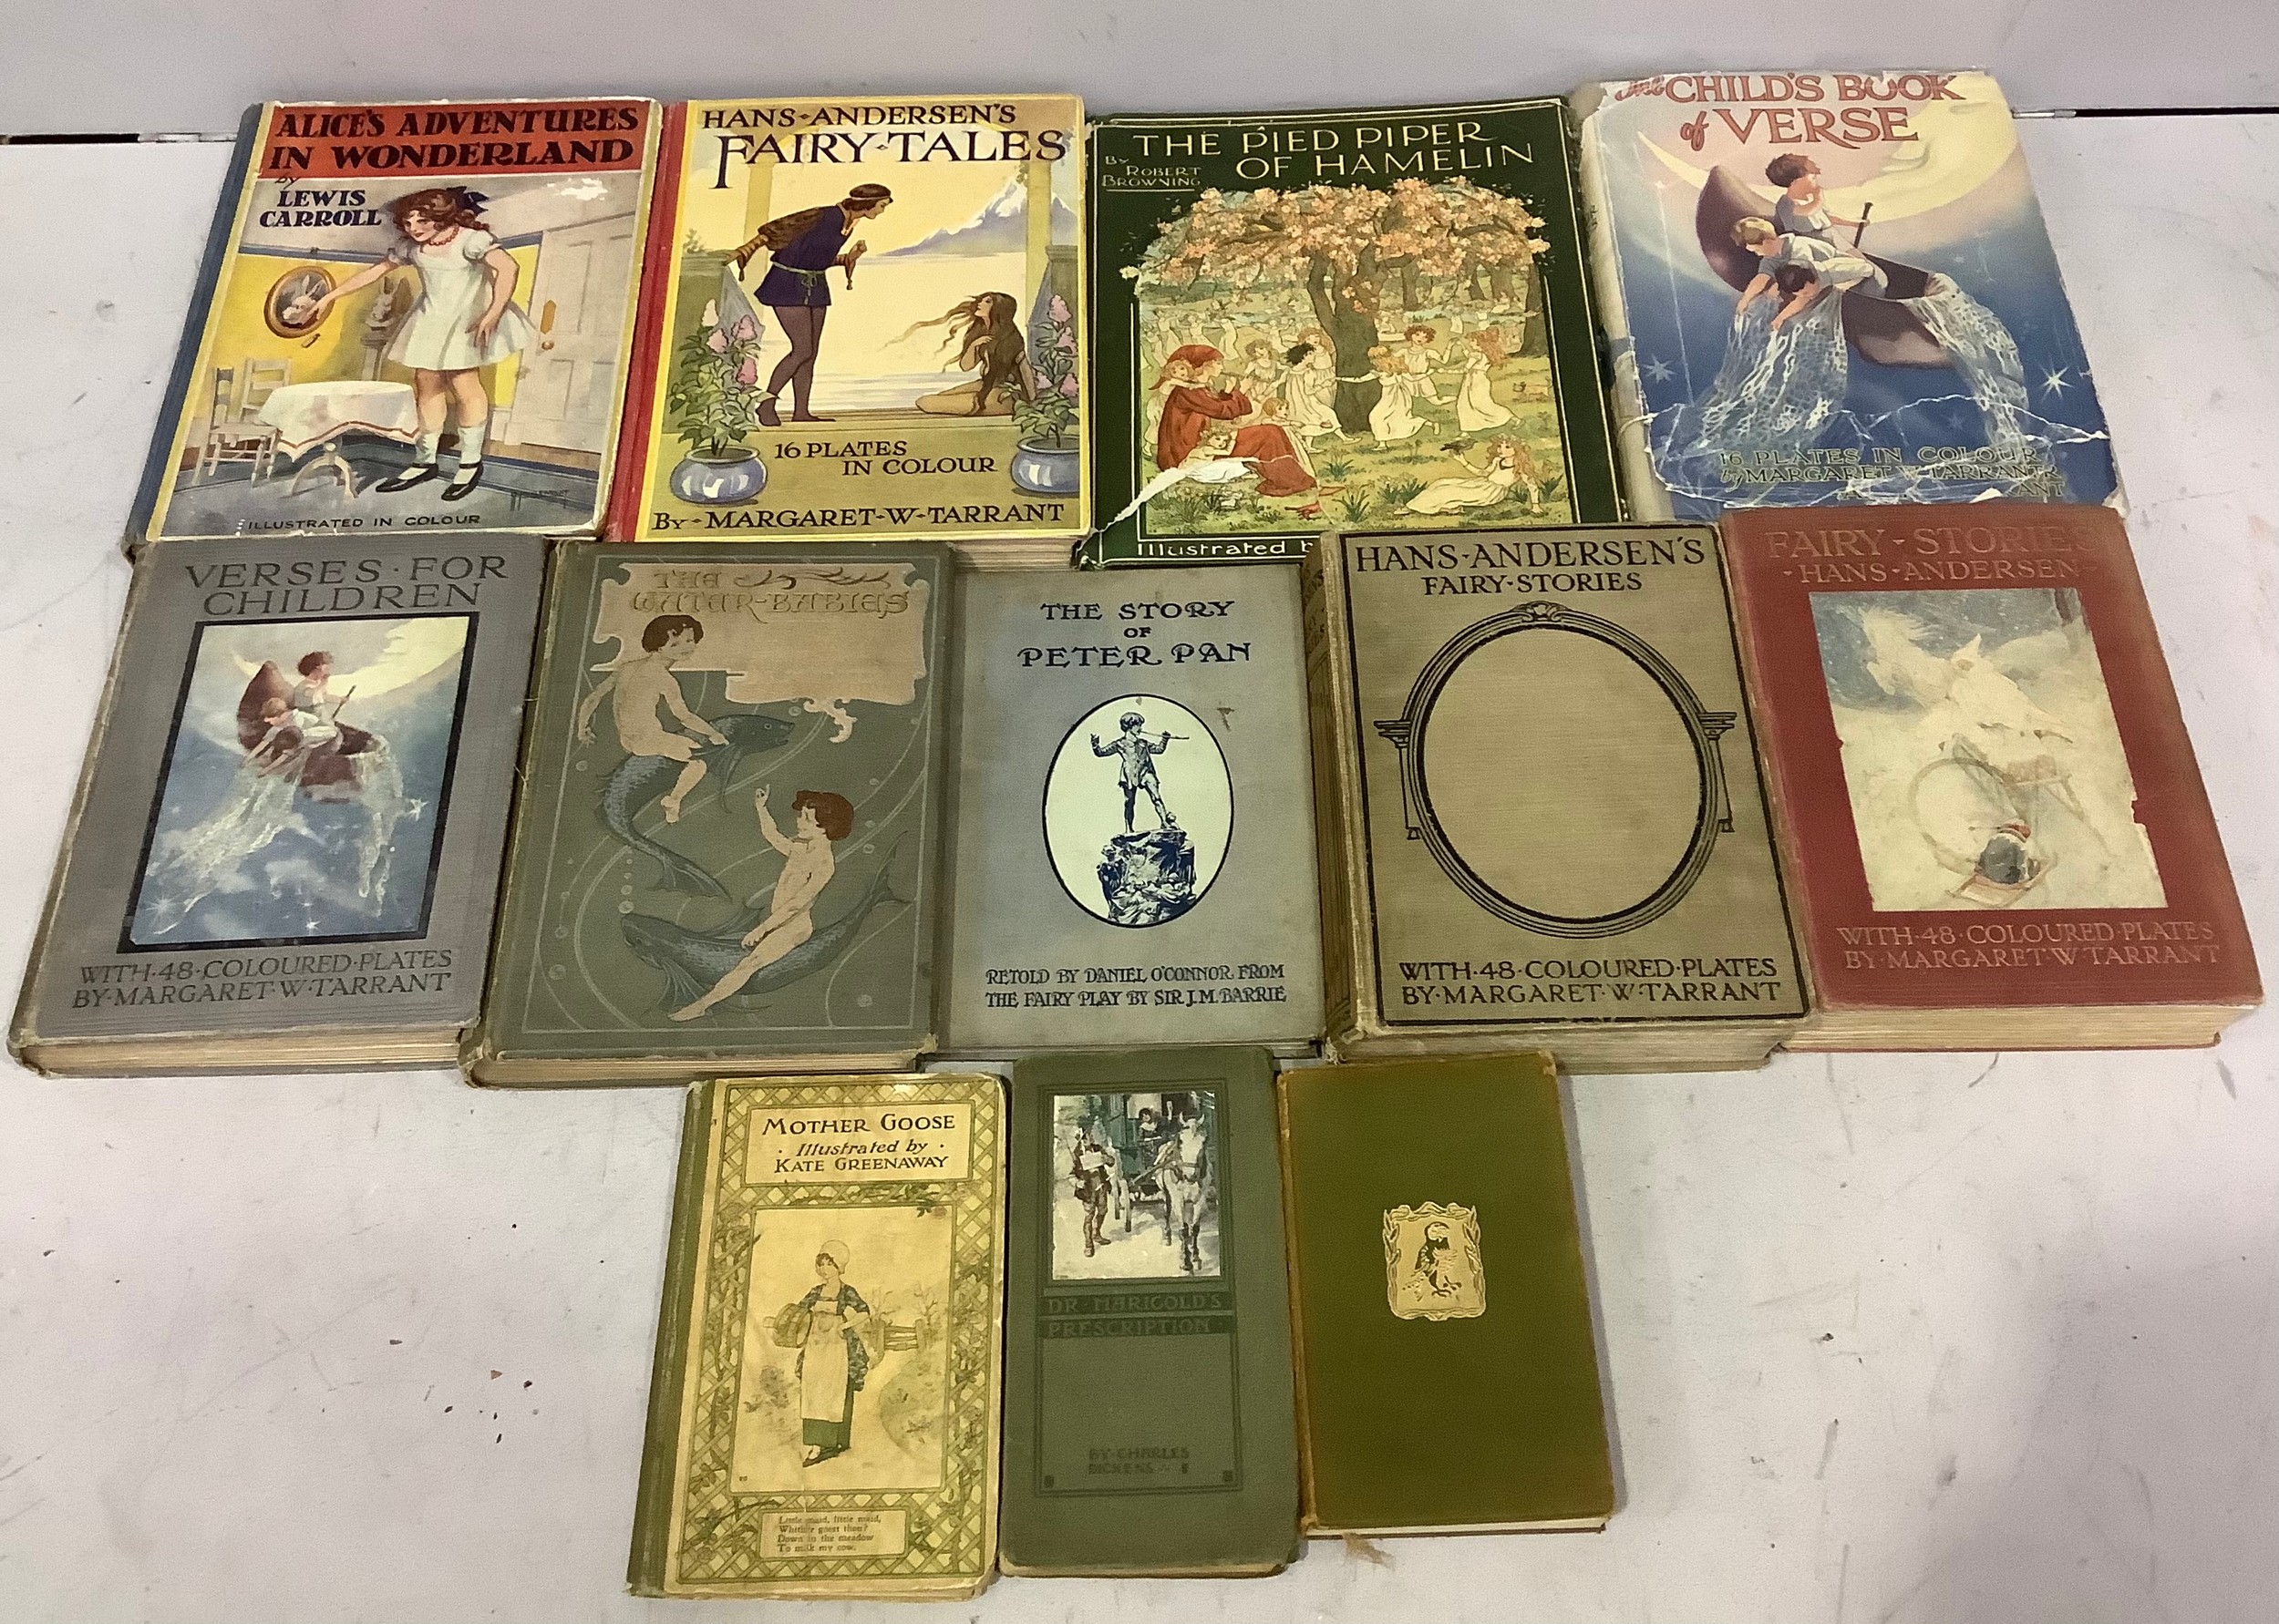 A quantity of old books including two various Hans Andersen's Fairy Stories, Fairy Tales, The